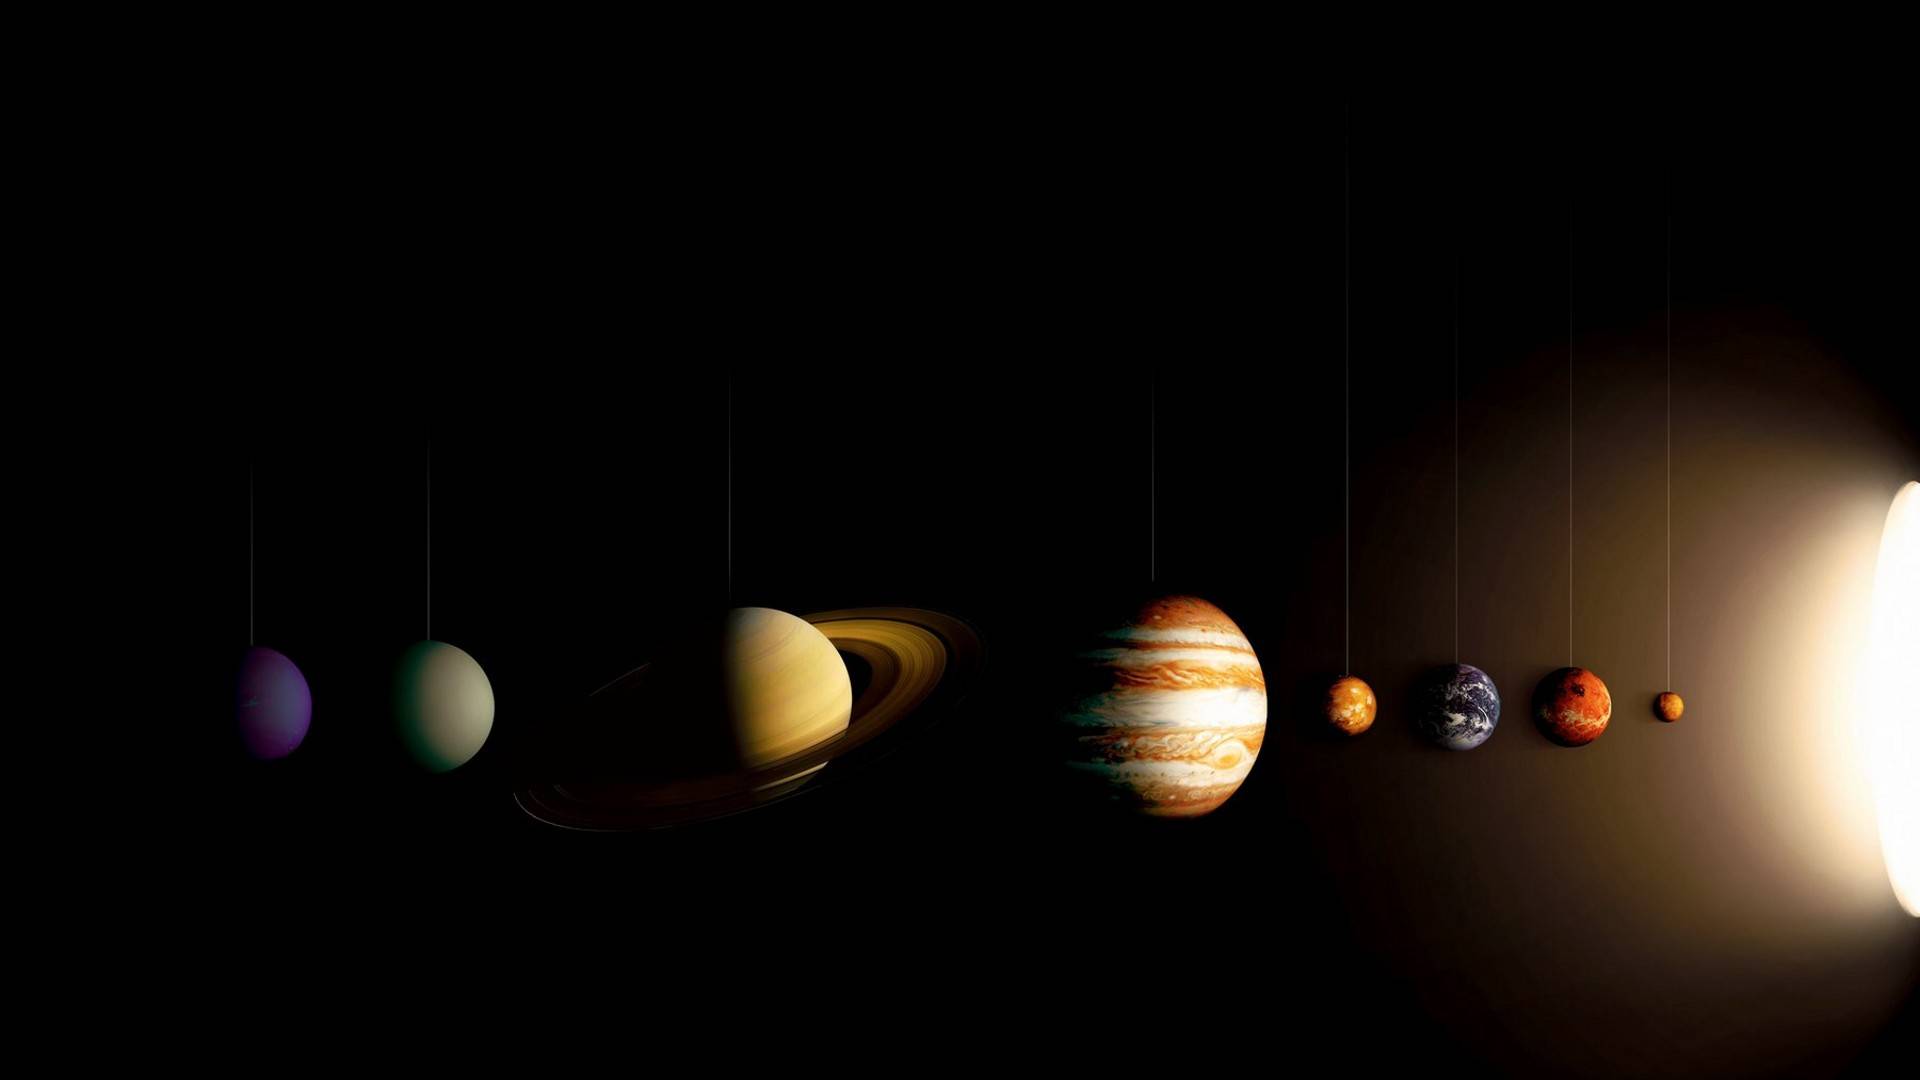 Solar System Wallpaper 1920x1080 (page 3) - Pics about space